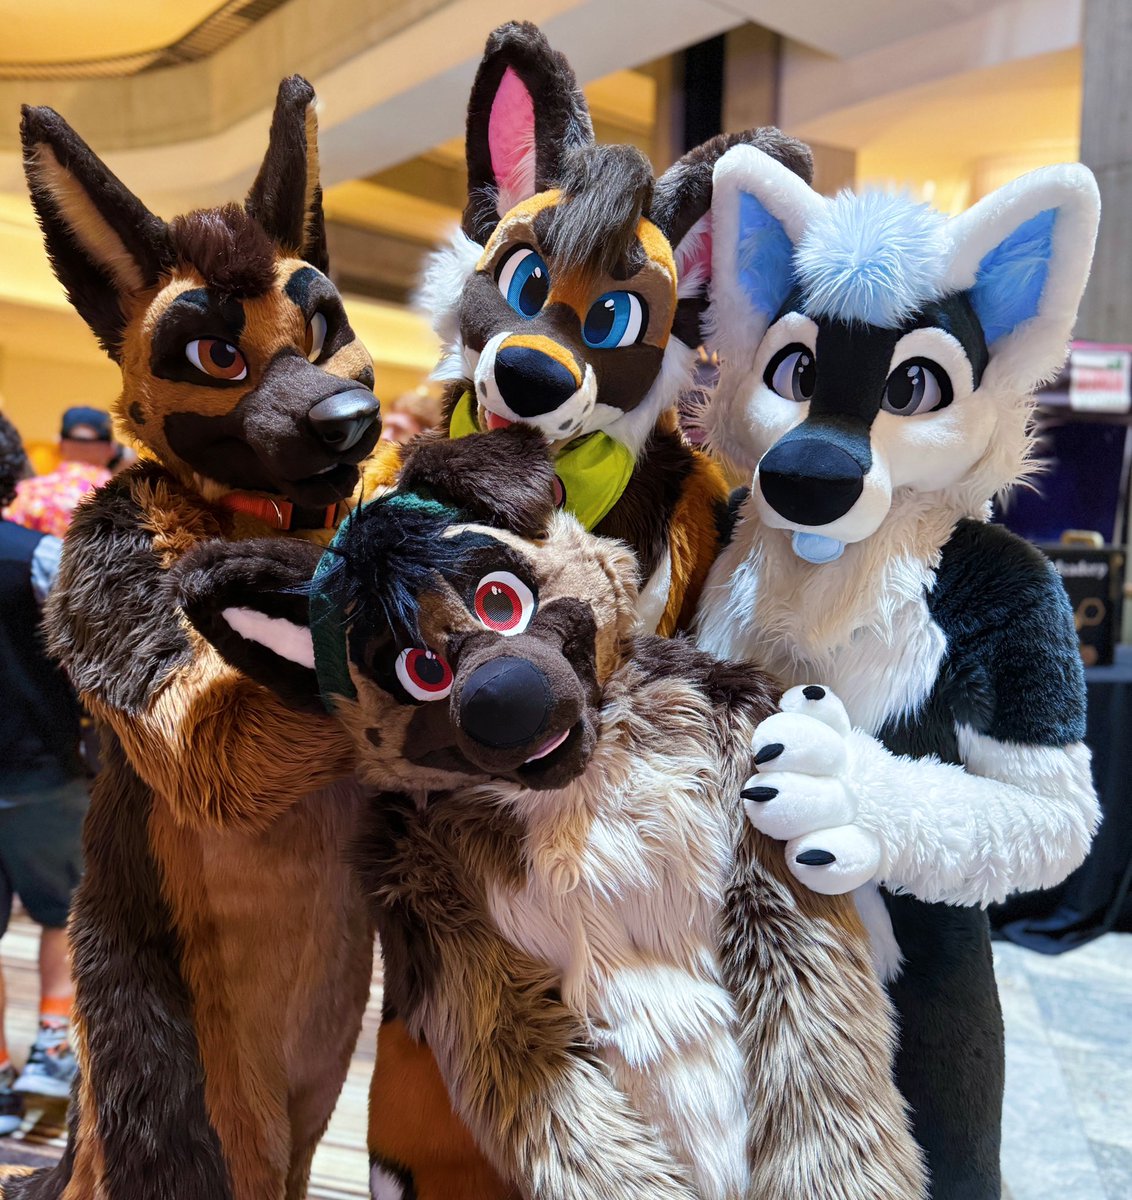 A couple of good dogs roaming around the #FWA24 lobby. Let’s give them treats. 🩷 @ShepDanellos @TheDizziest @TukioAWD @ElijahHusky #fursuit #fursuiting